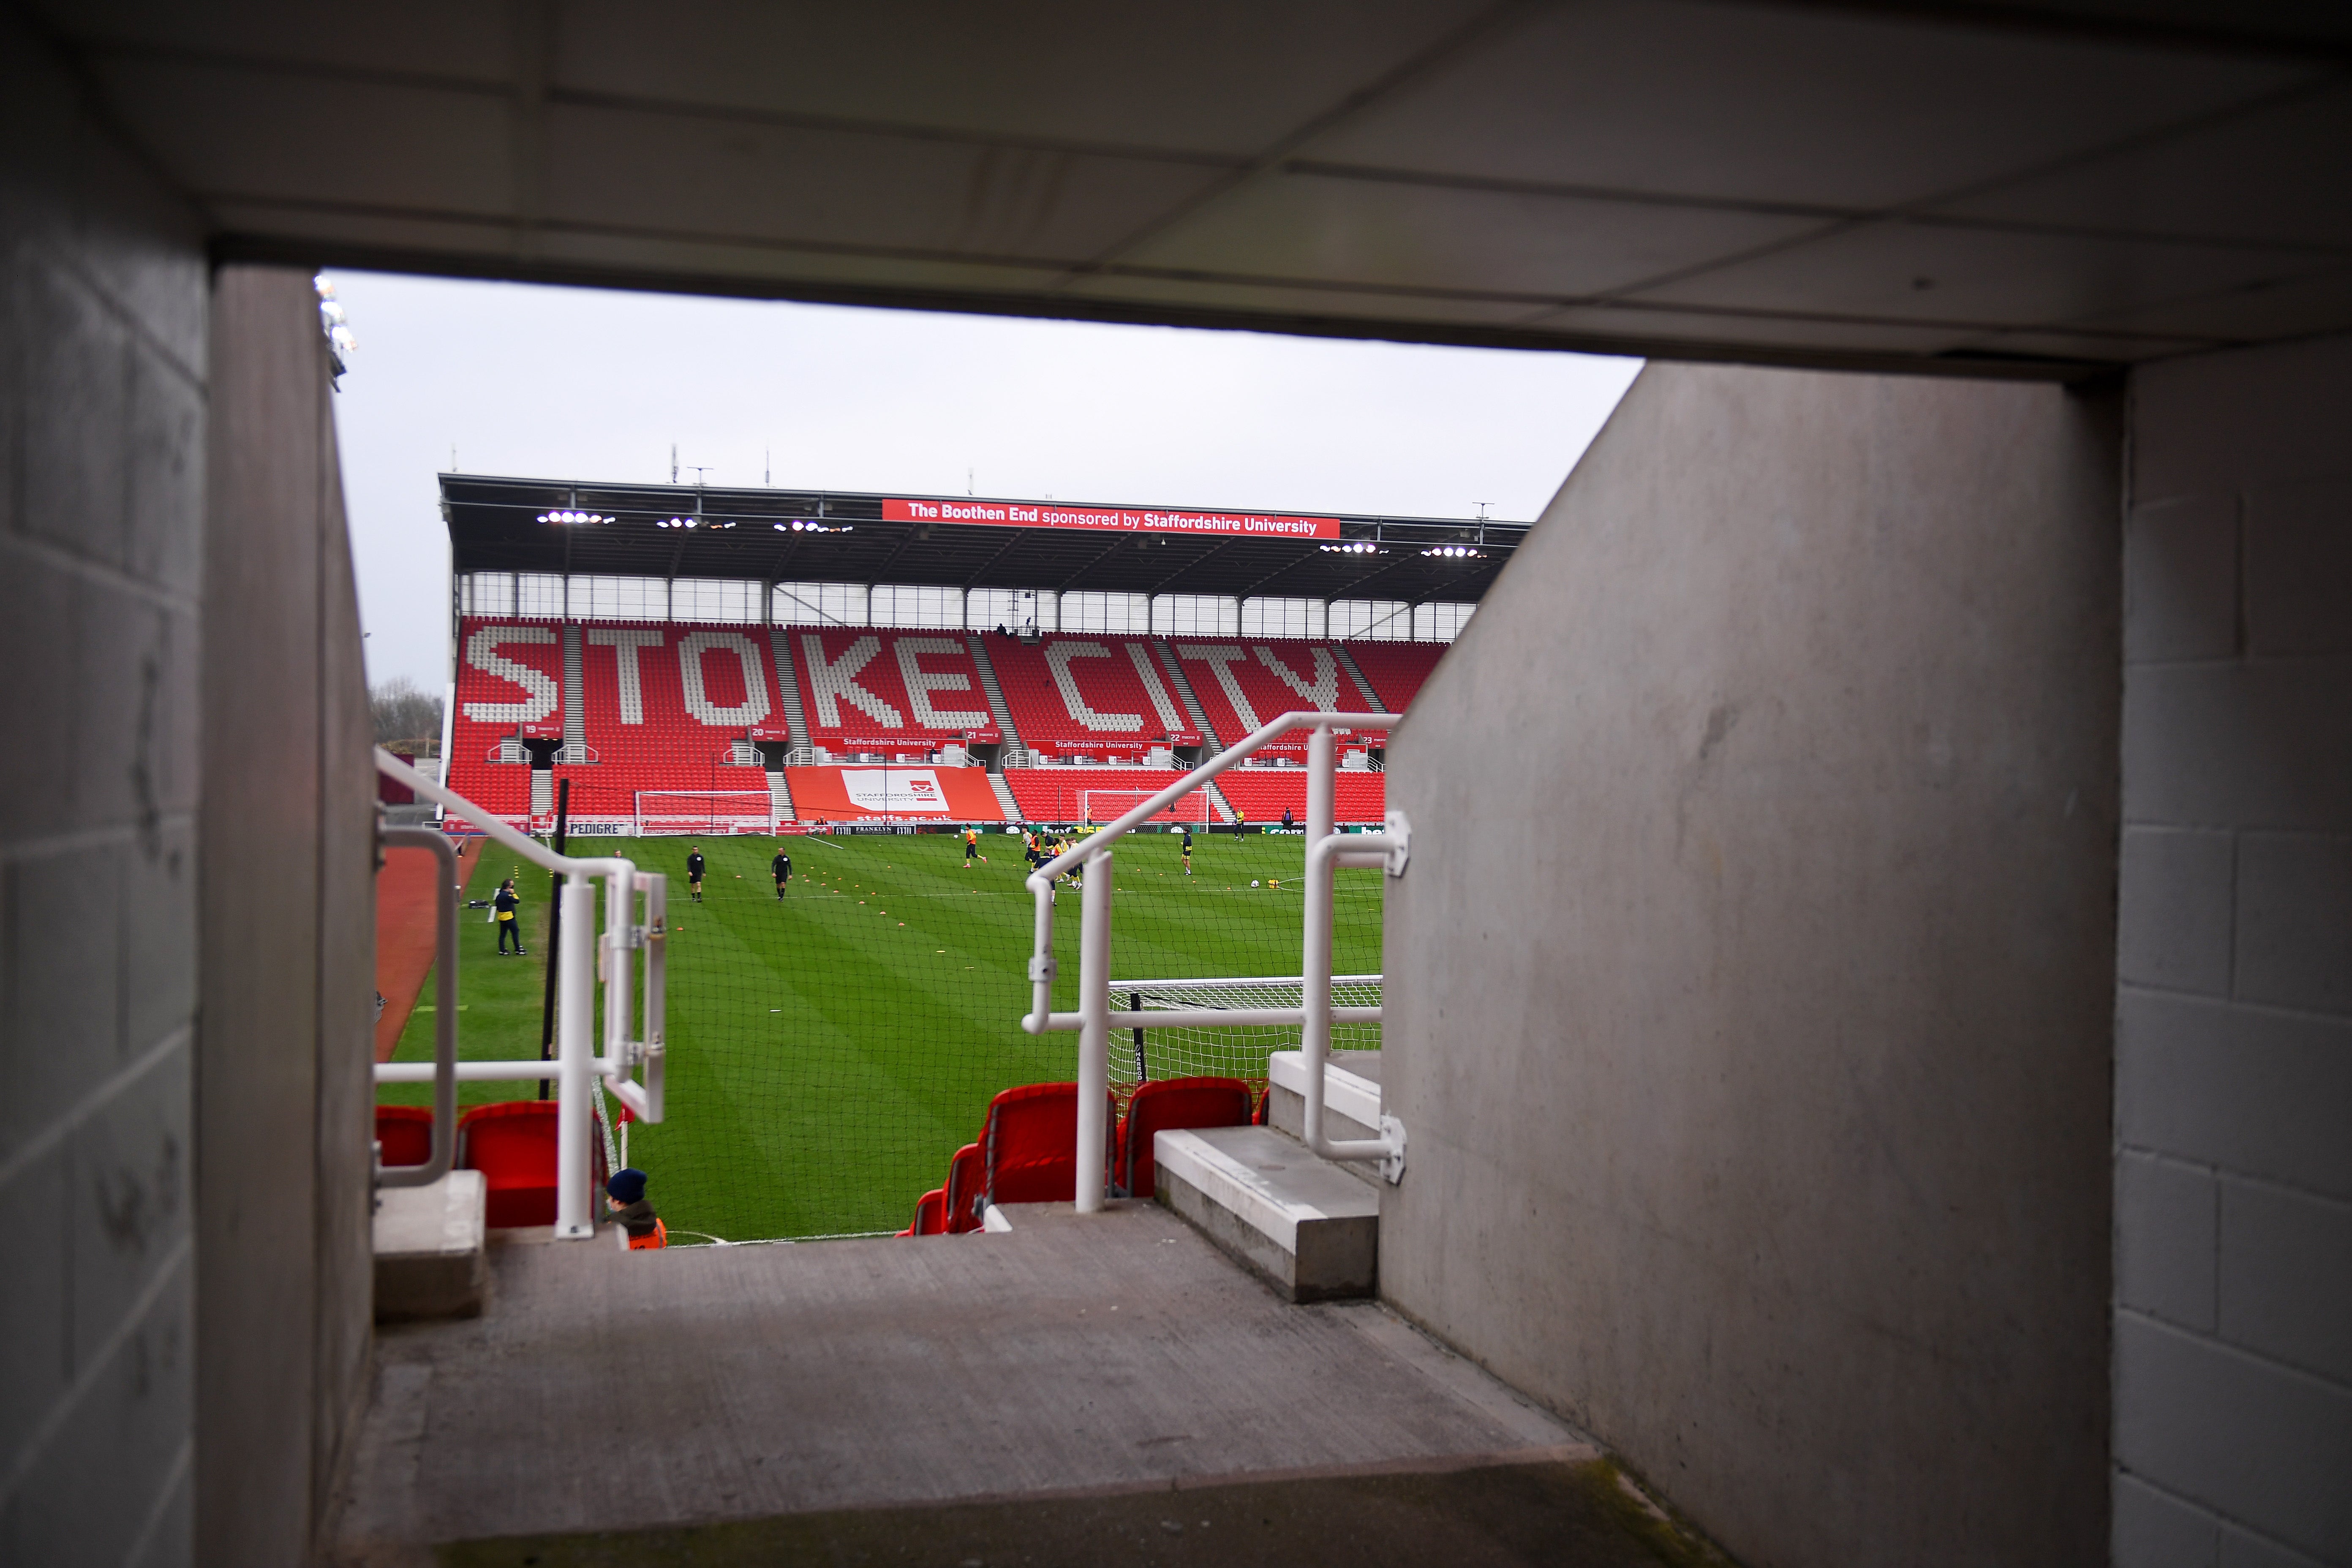 An overview of the Bet365 Stadium